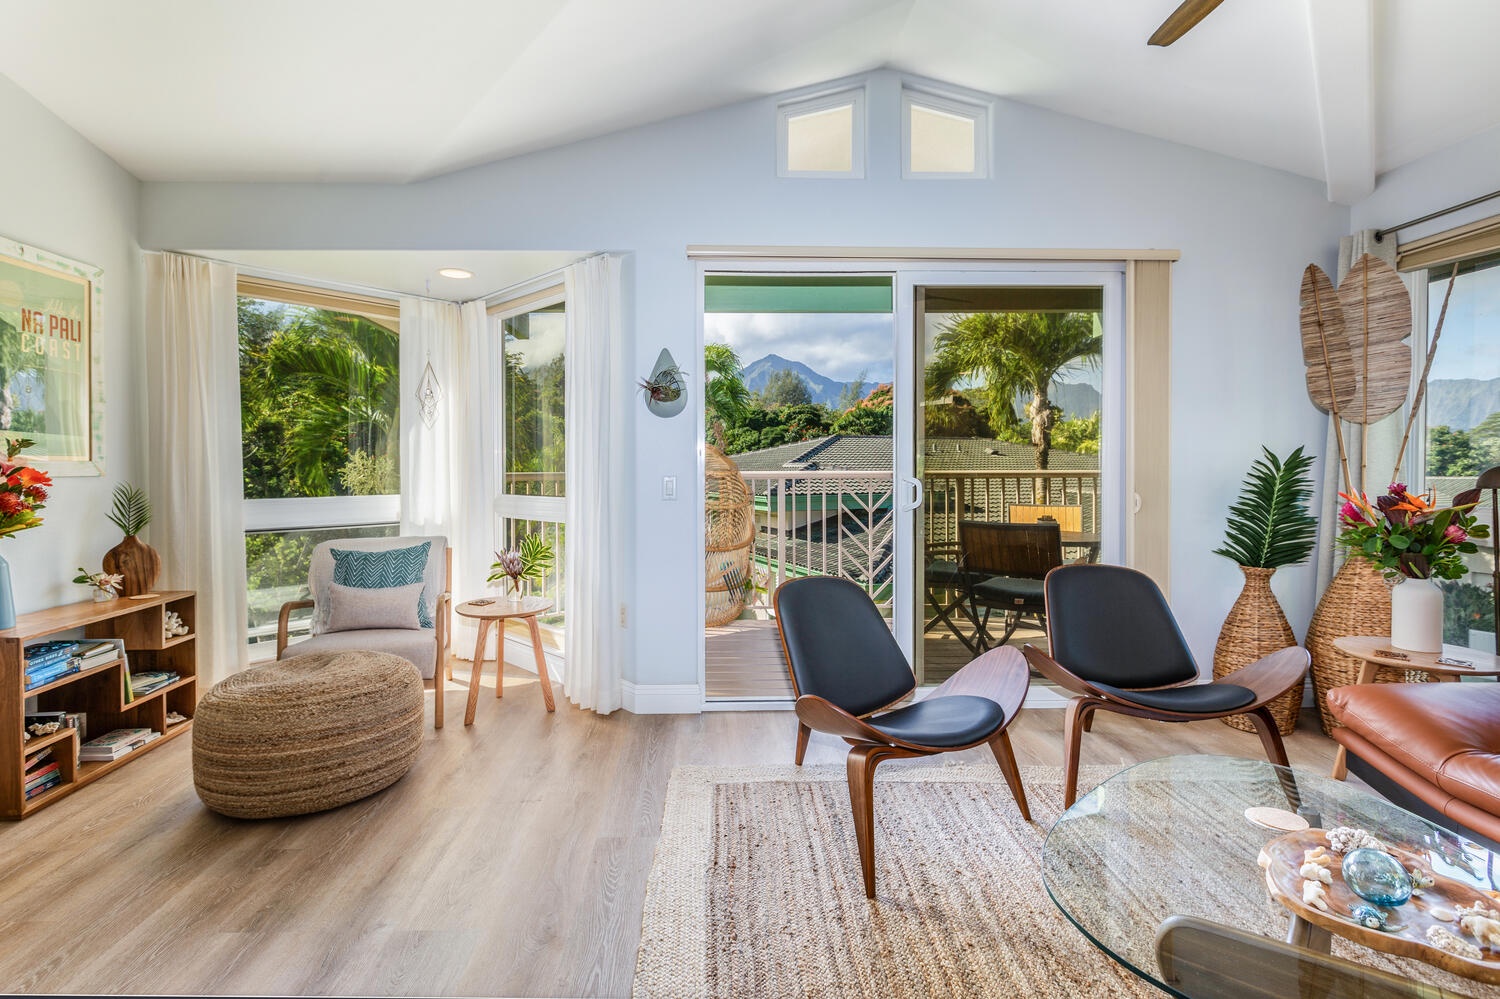 Princeville Vacation Rentals, Sea Glass - A chic and stylish living area with large windows and glass sliders for a bright and airy ambiance.